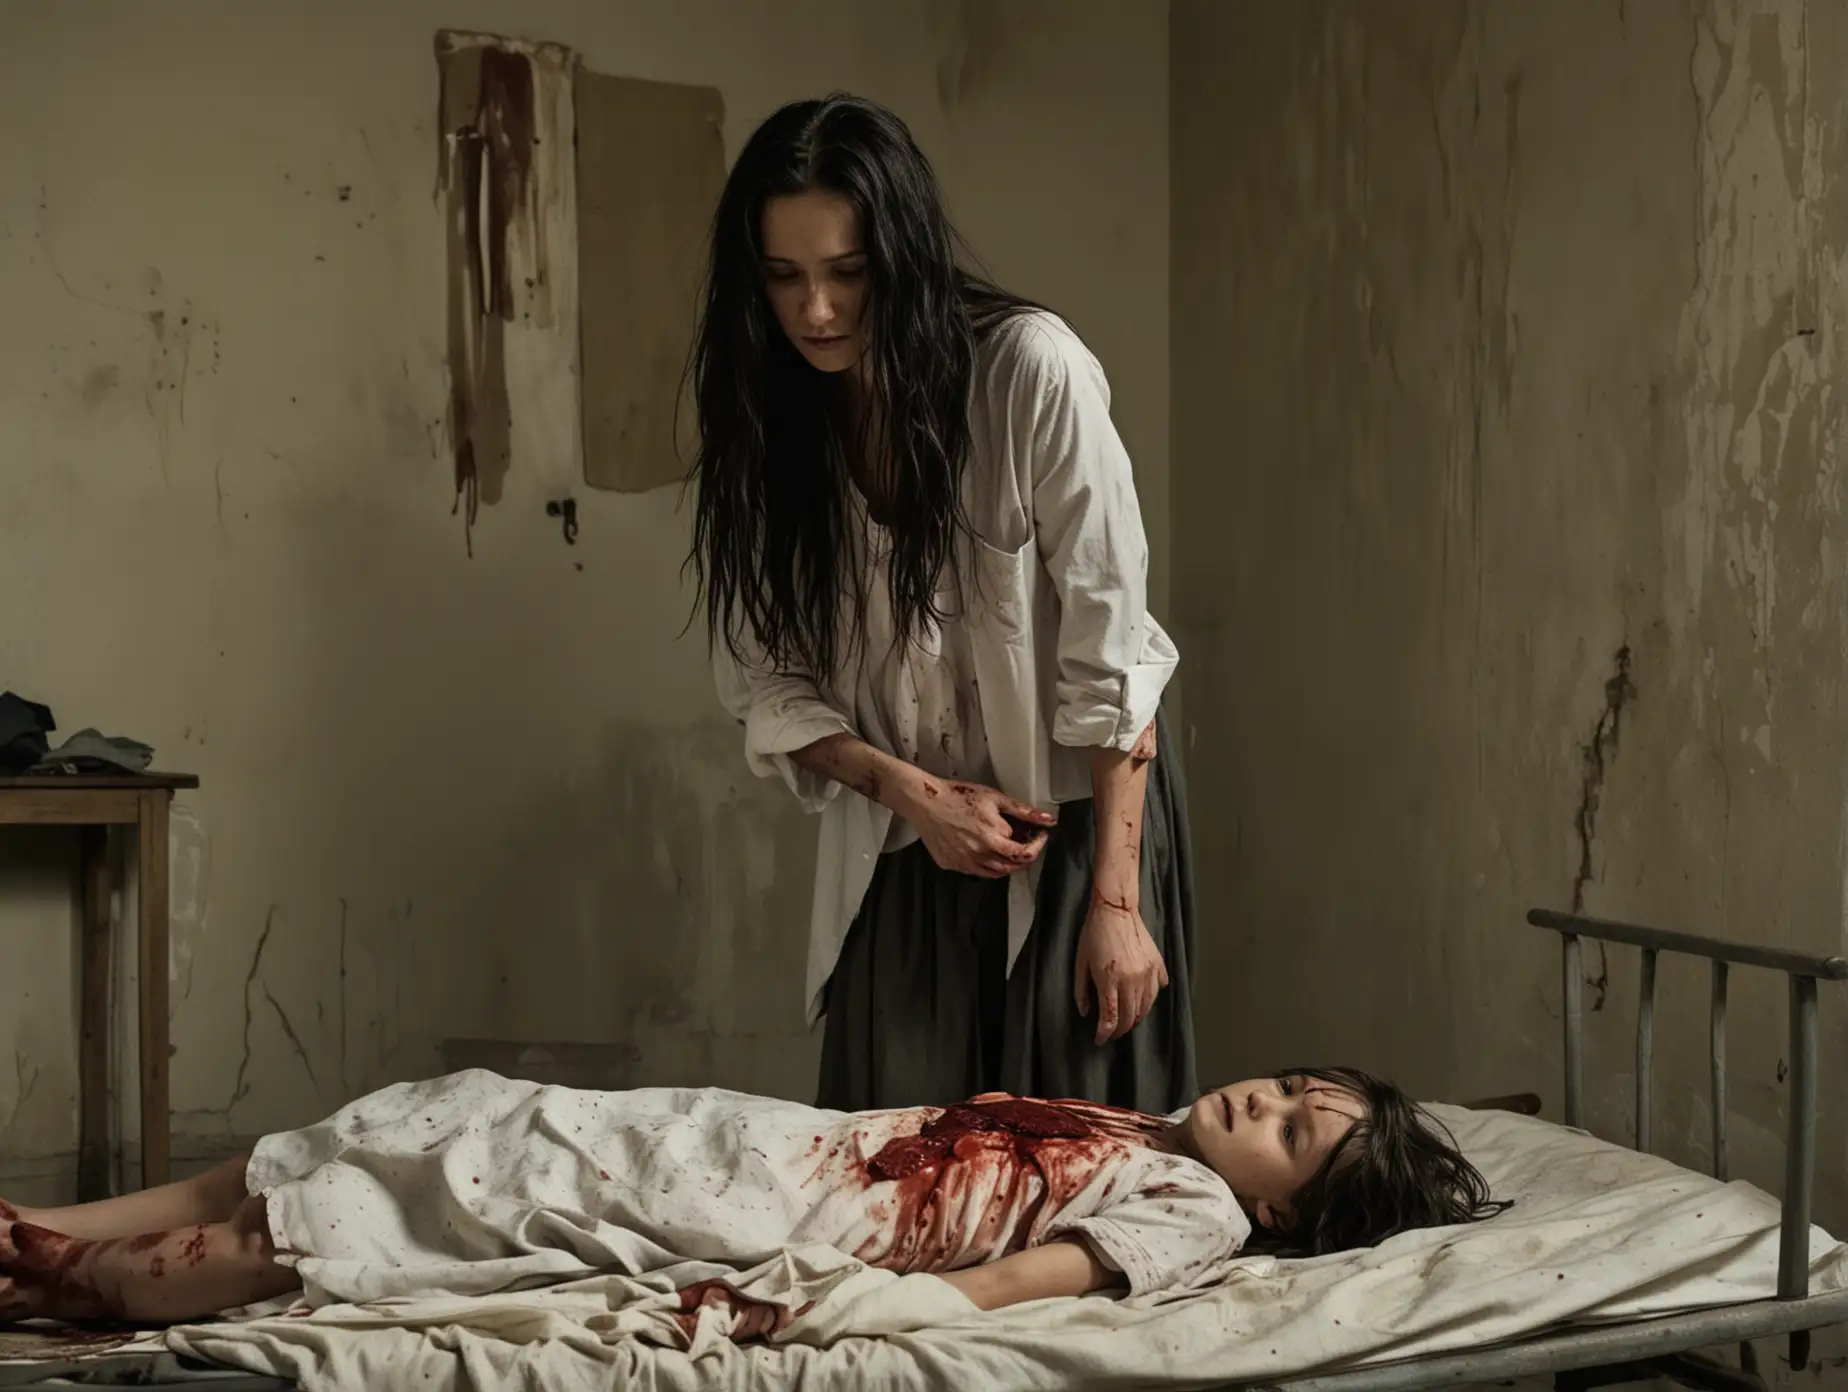 A woman with dark long hair stands and holds an unconscious 10-year-old boy in her arms. There is blood nearby, a saw, a hospital couch. She's standing in a small old room. The light only comes from the window behind them.